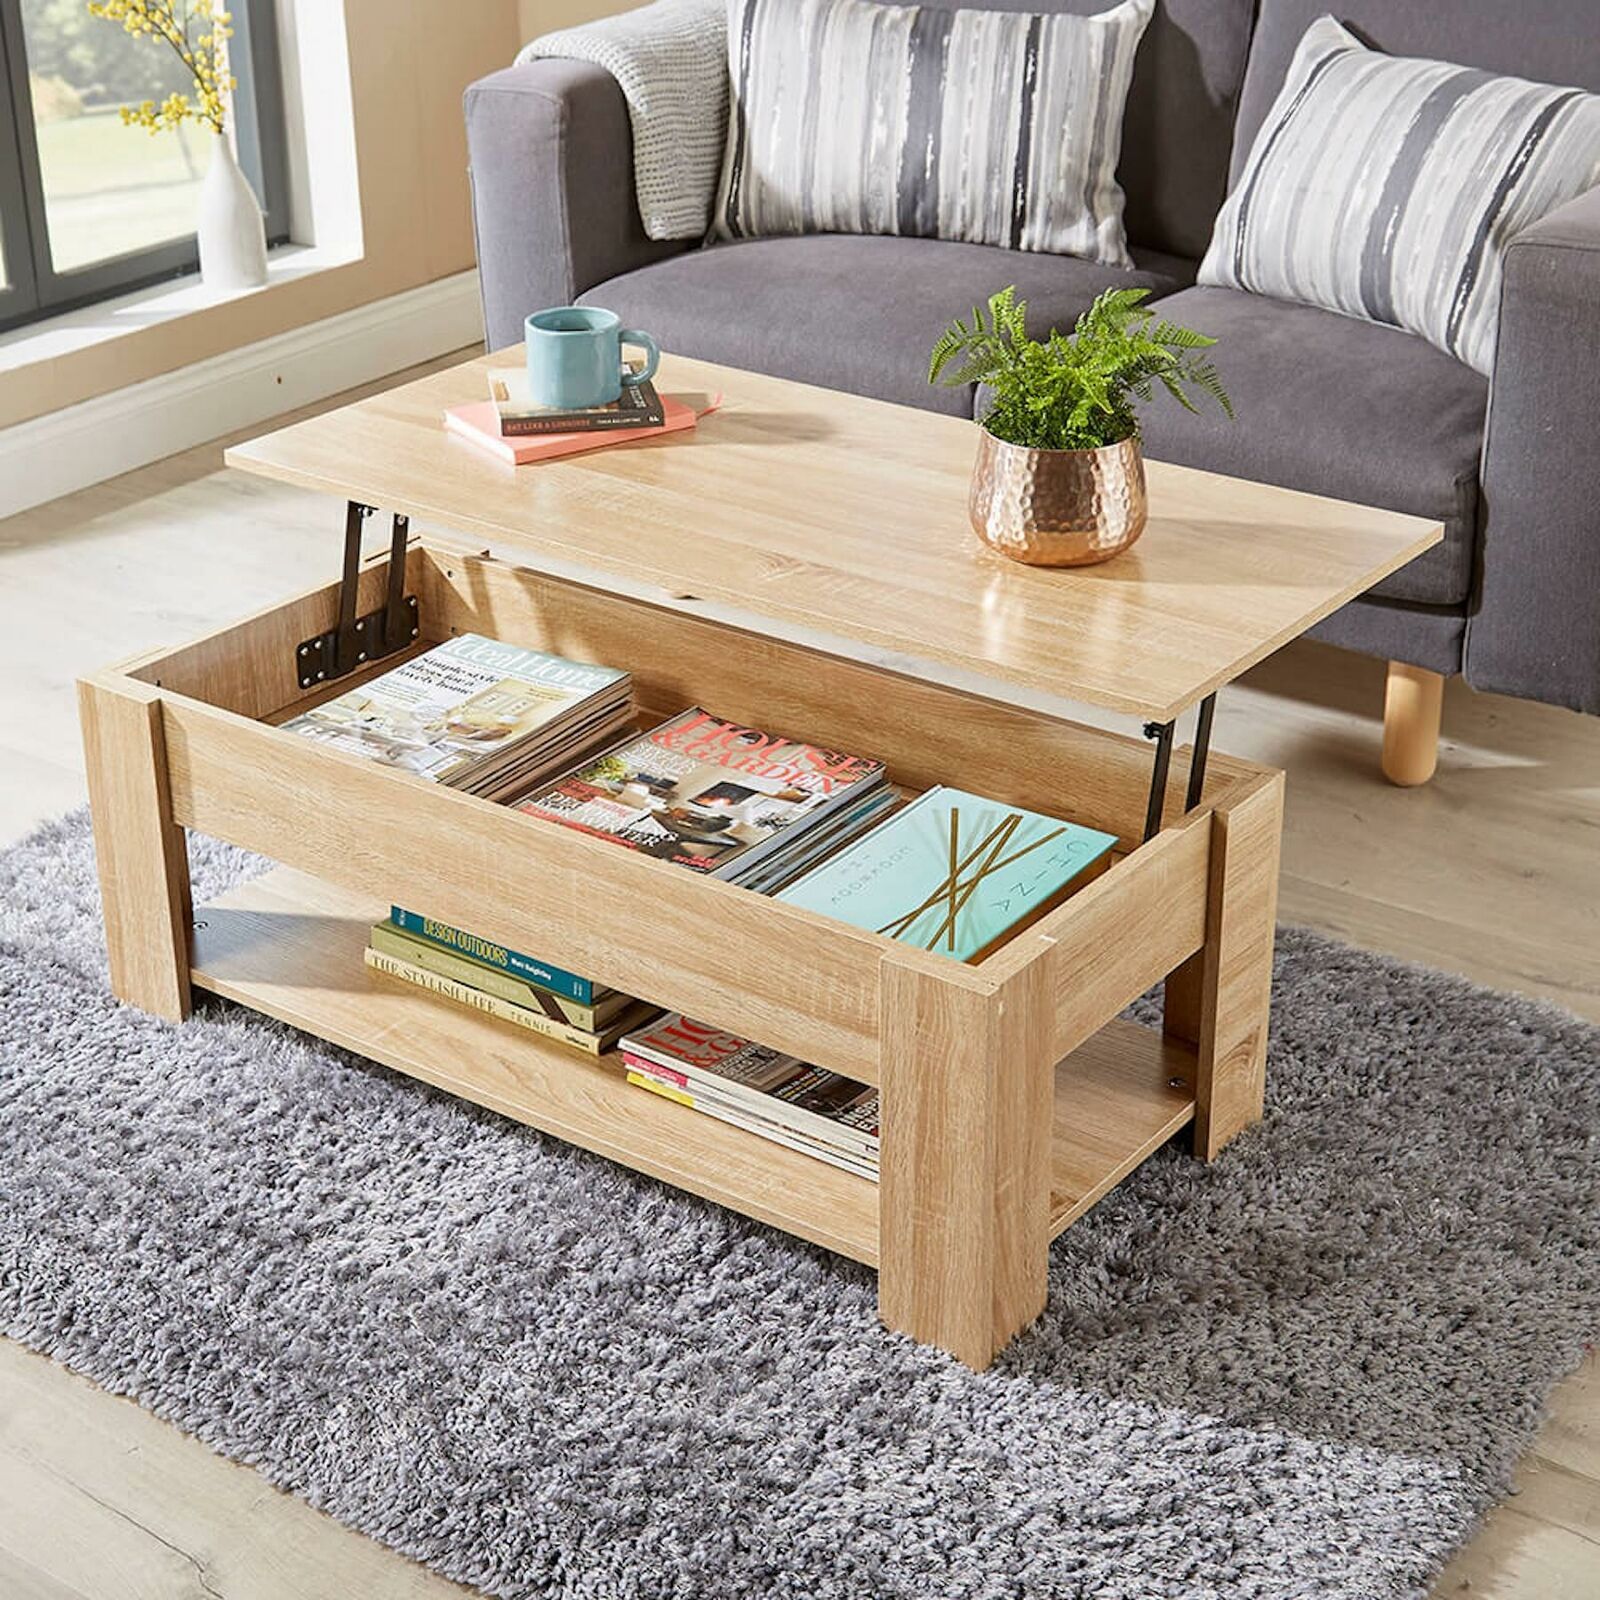 Oak Wooden Coffee Table With Lift Up Top Storage Area And Magazine Shelf |  Ebay In Coffee Tables With Storage (Photo 10 of 15)